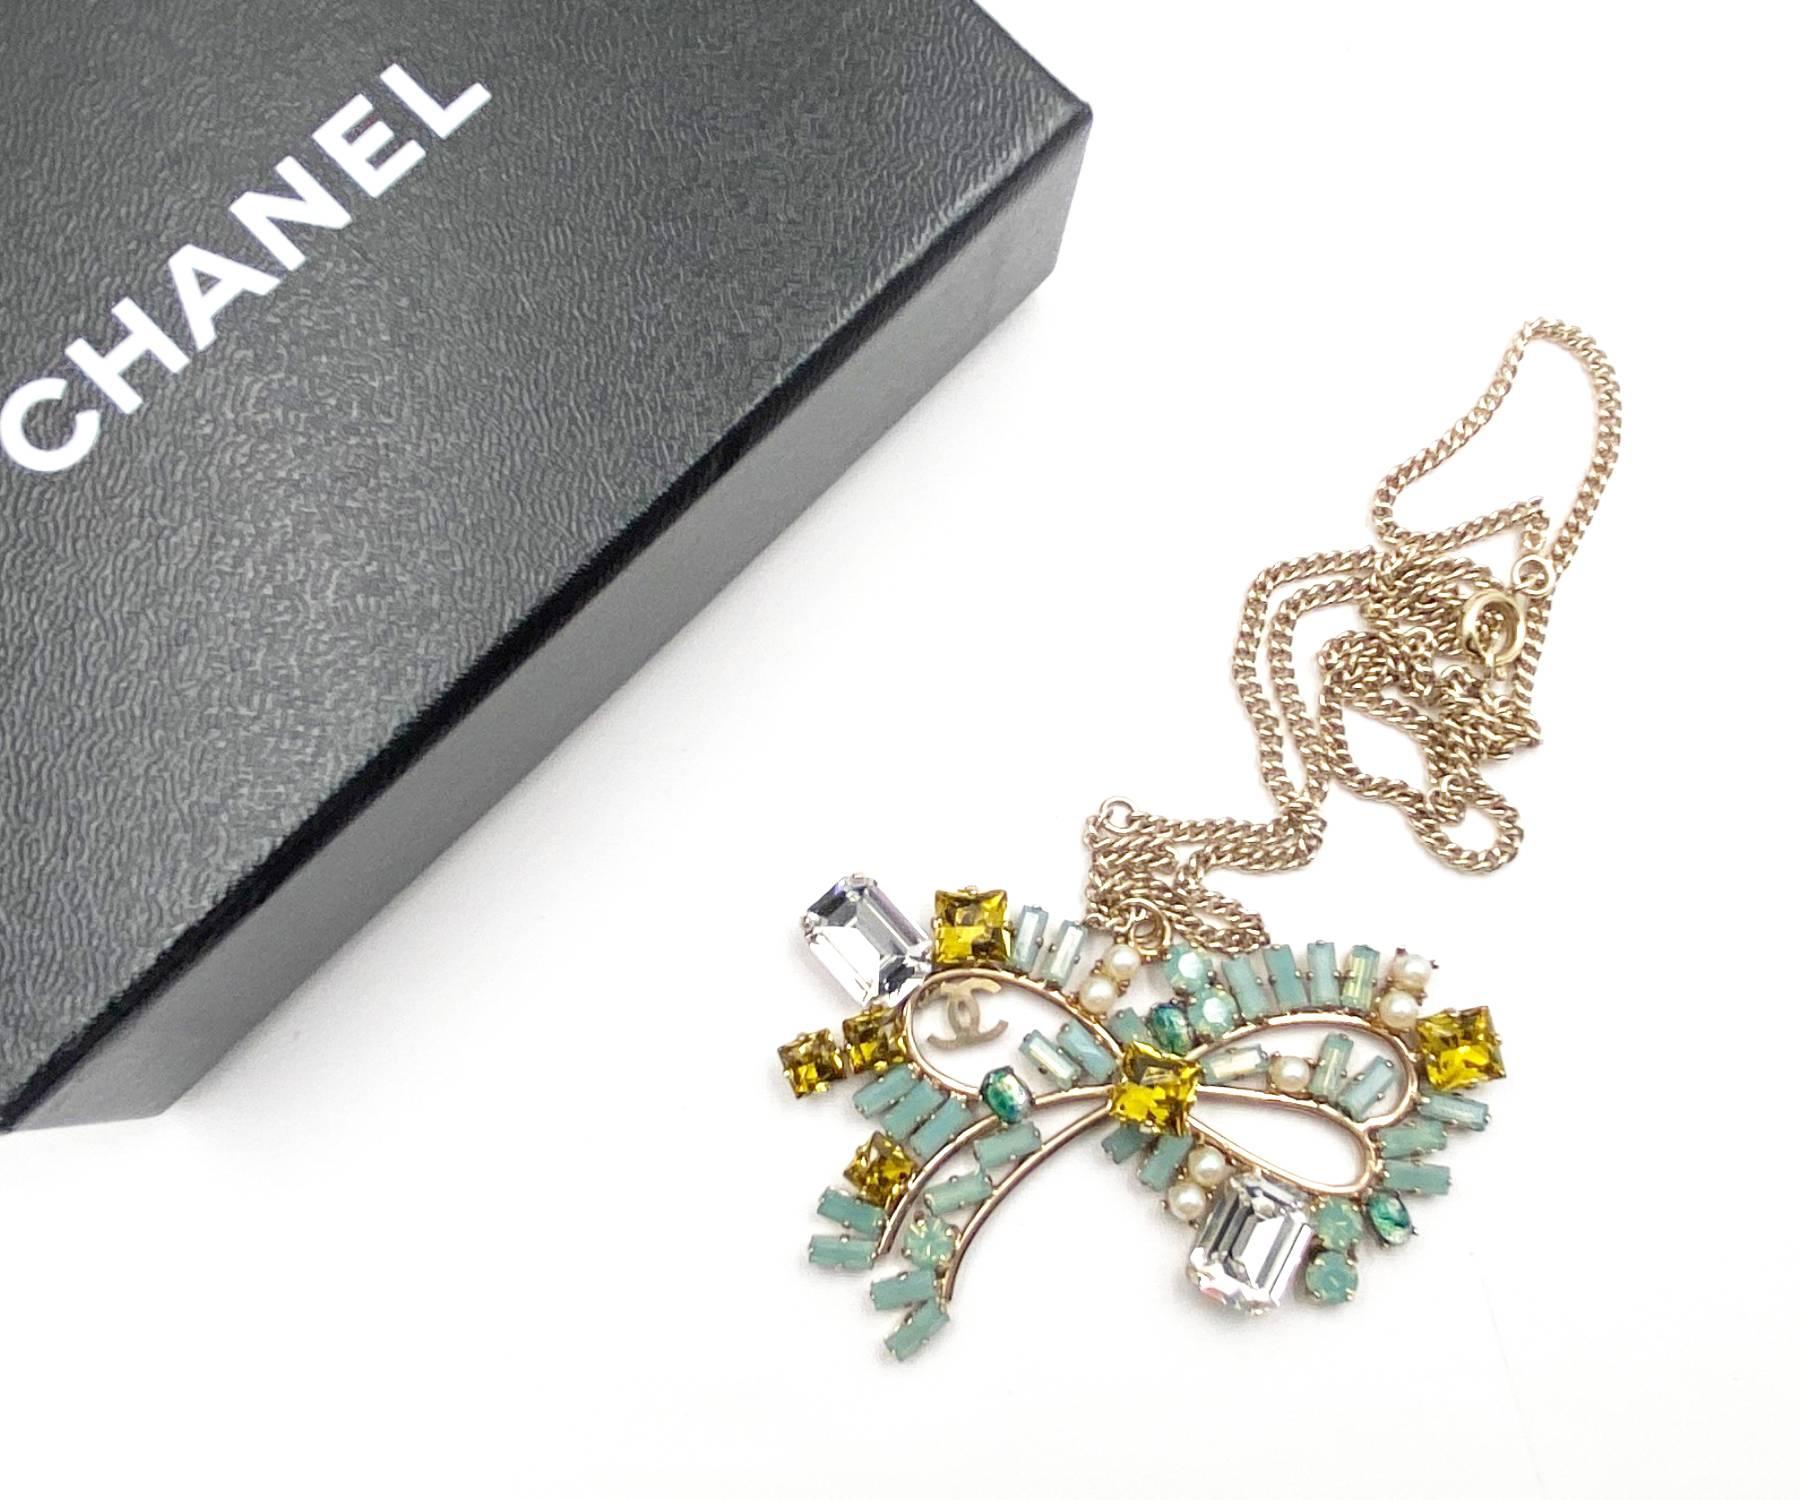 Chanel Gold CC Bow Turquoise Mustard Crystal Necklace

*Marked 05
*Made in Italy
*Comes with original box

-It is approximately 16″ to 23″ long.
-The pendant is approximately 3″ x 2″.
-The beautiful pendant is full of turquoise and mustard color